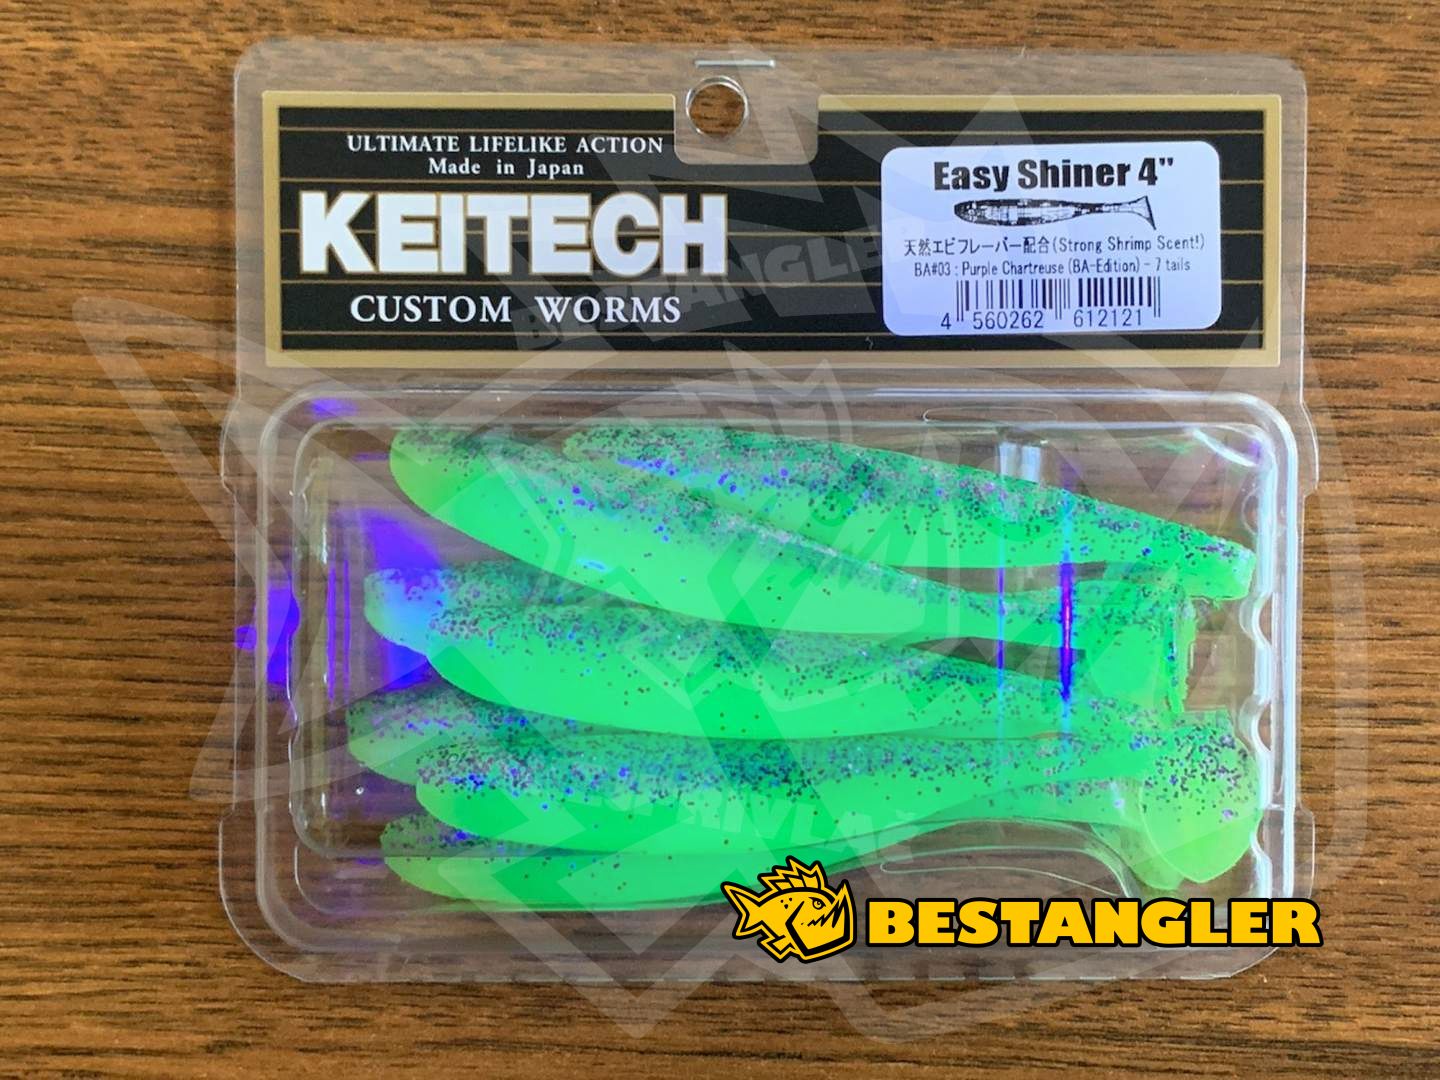 Keitech Easy Shiner 4 Purple Chartreuse 